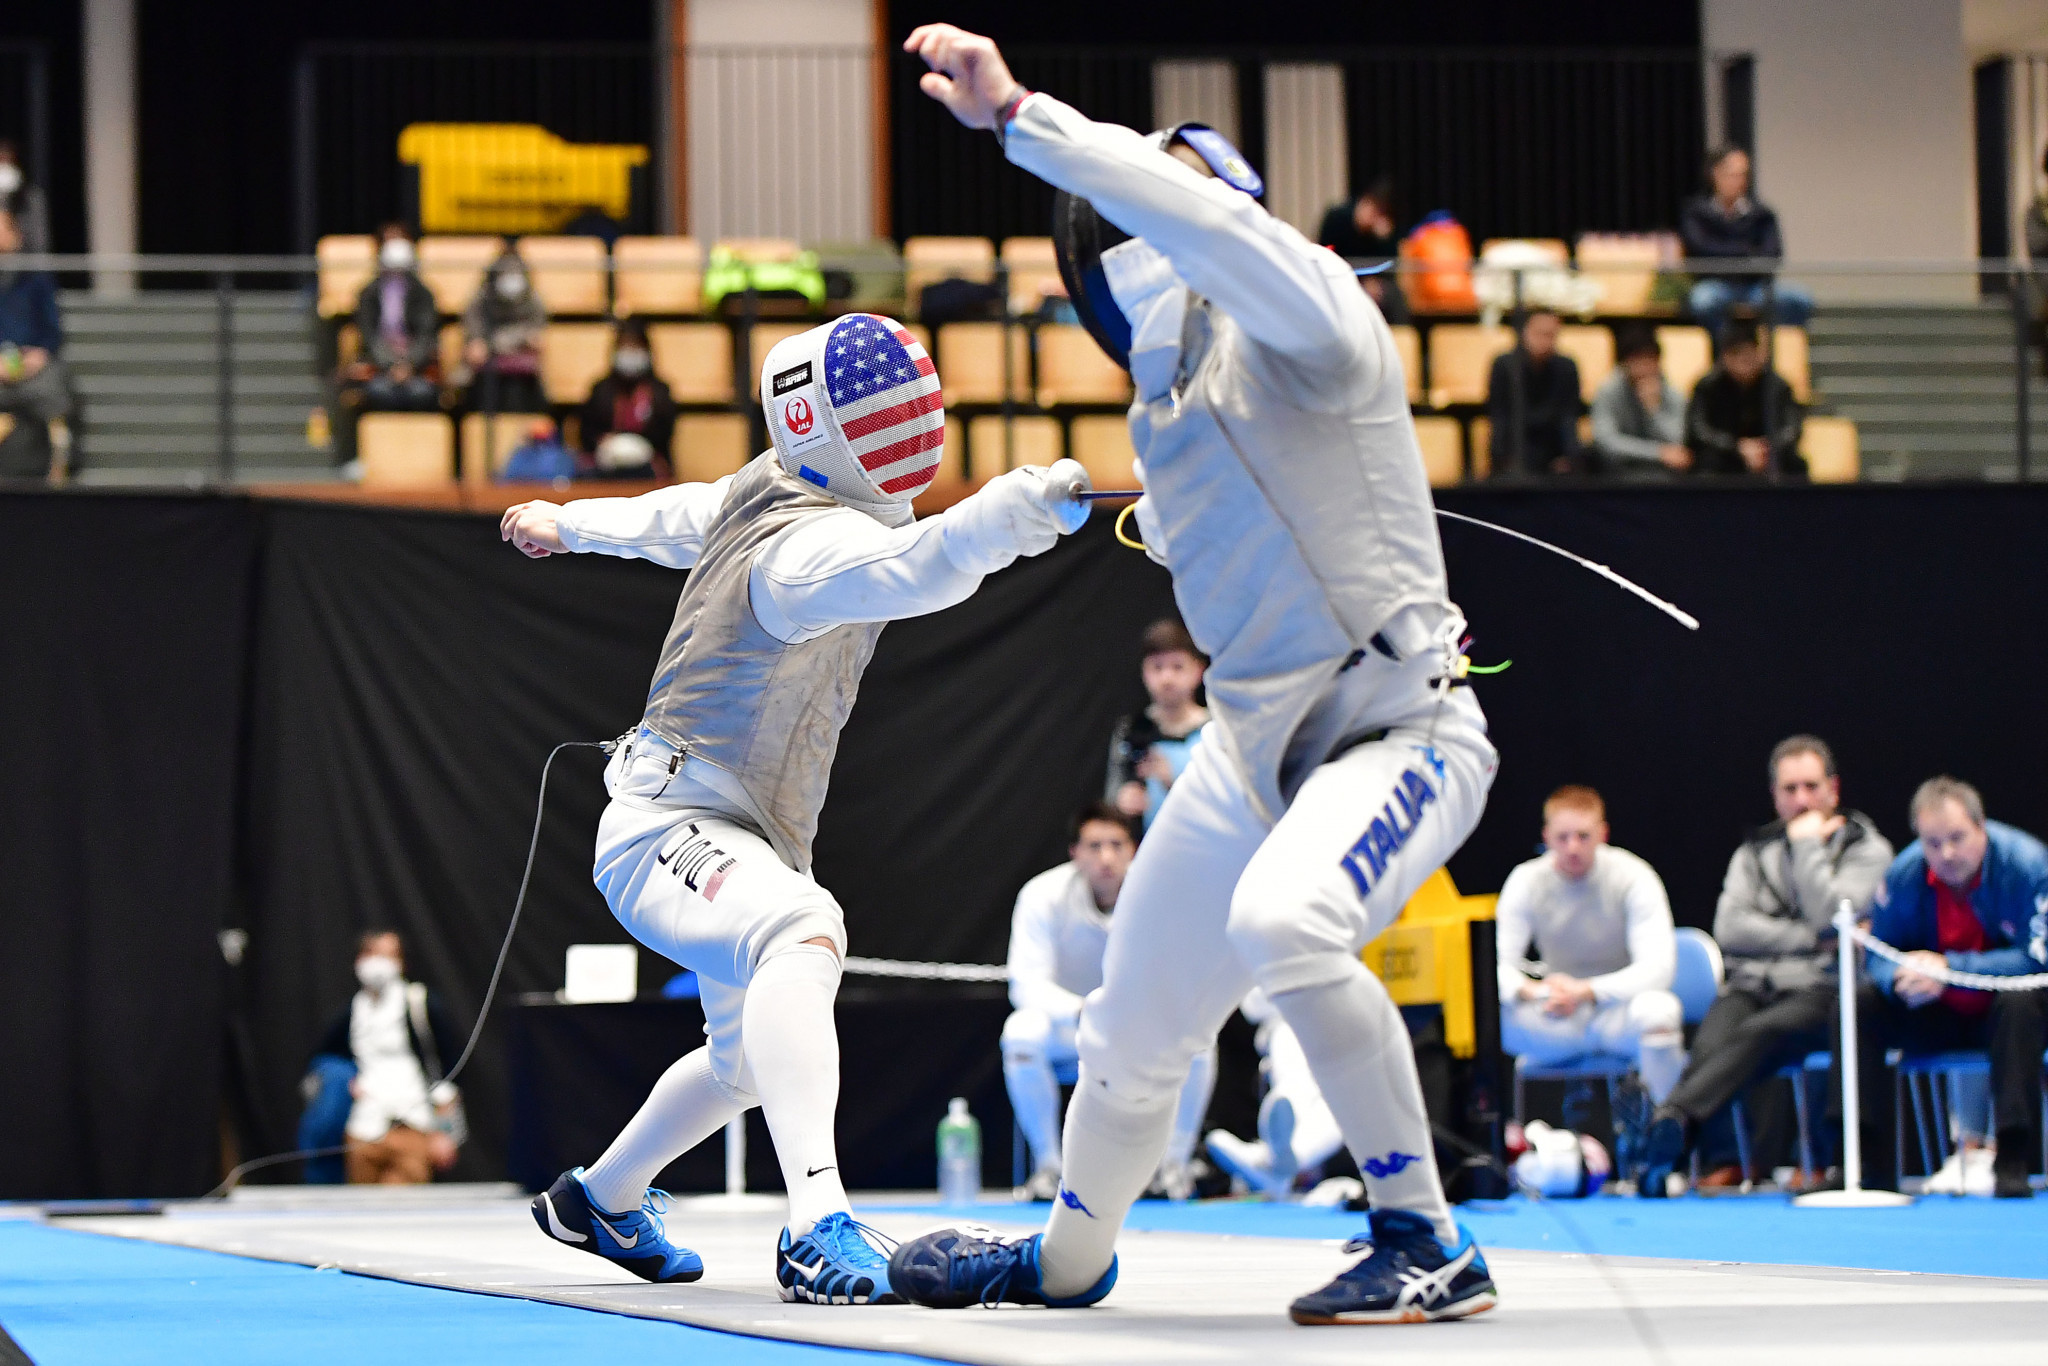 Two US fencers progress from FIE Foil Grand Prix preliminary round in front of home crowd